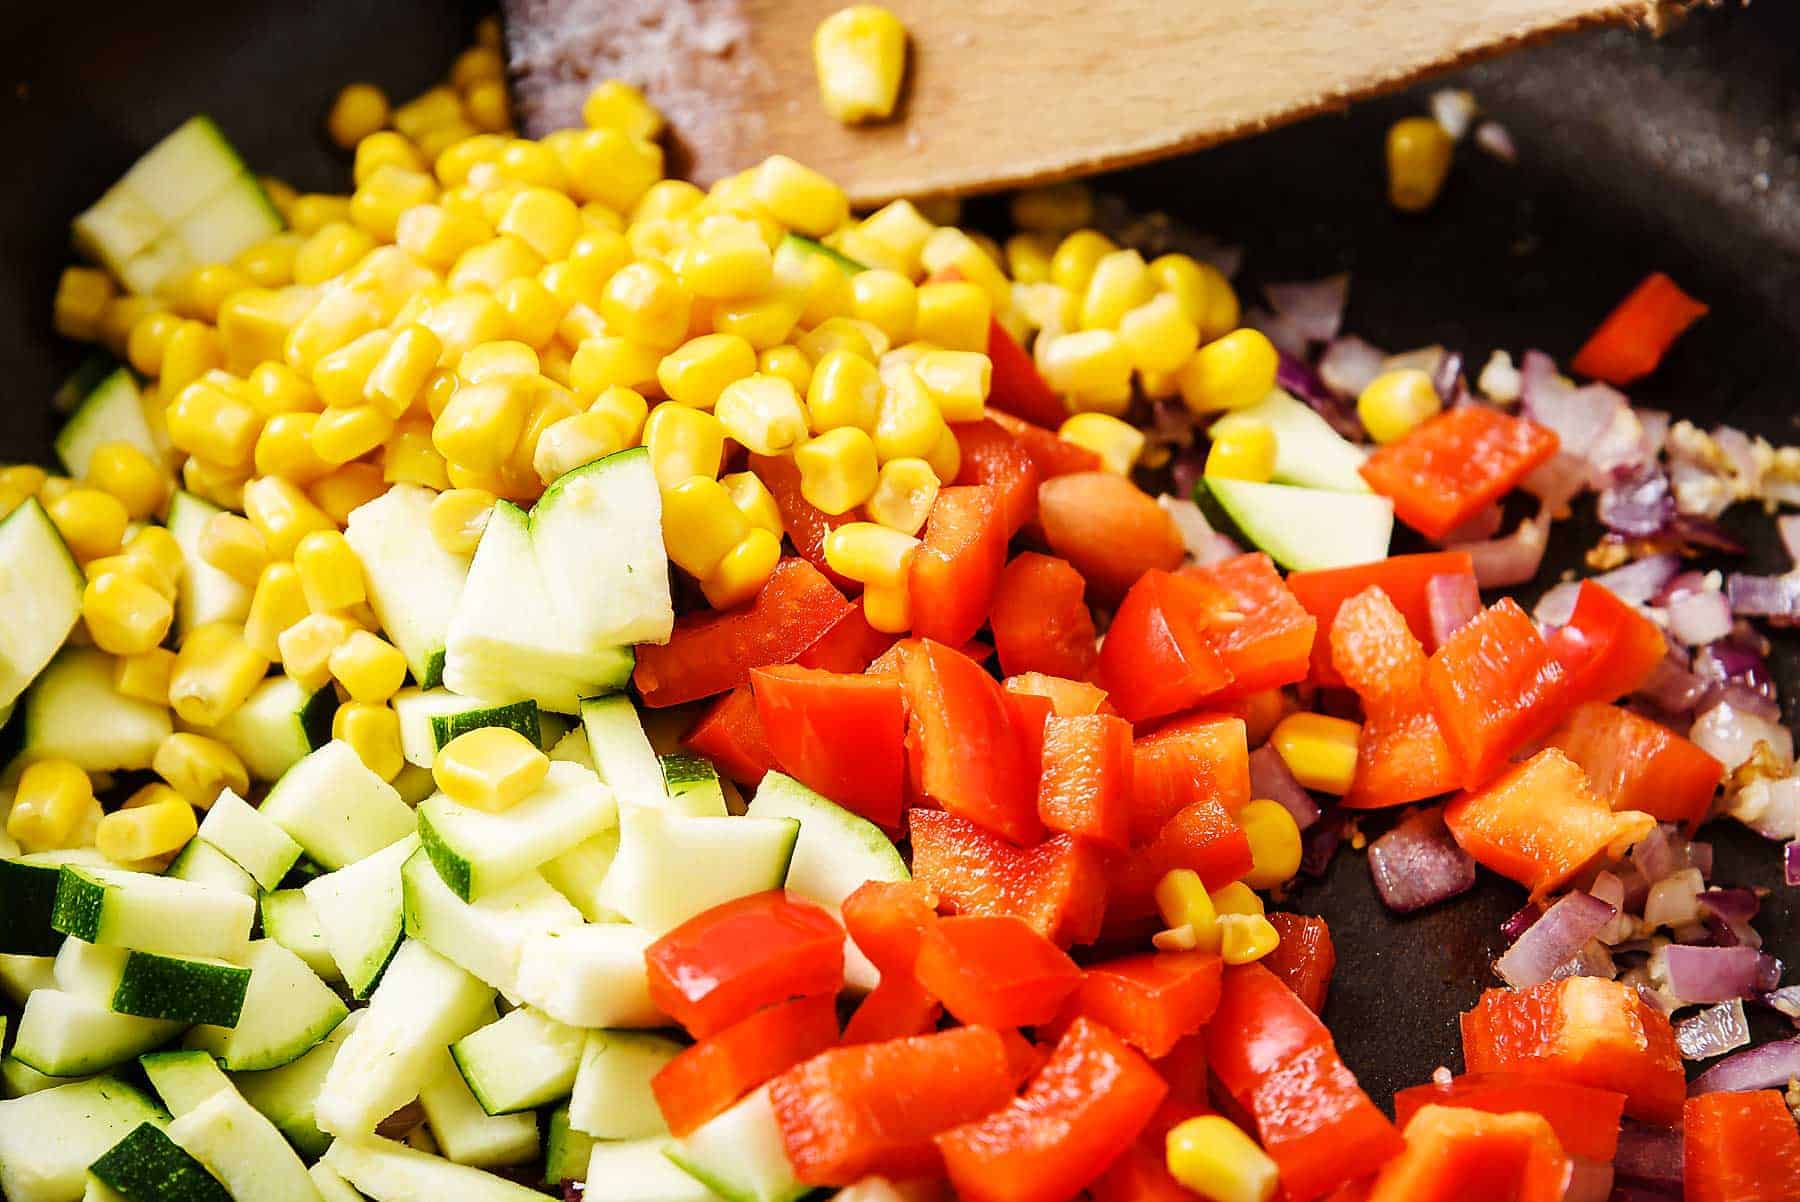 Adding chopped vegetables to the pan